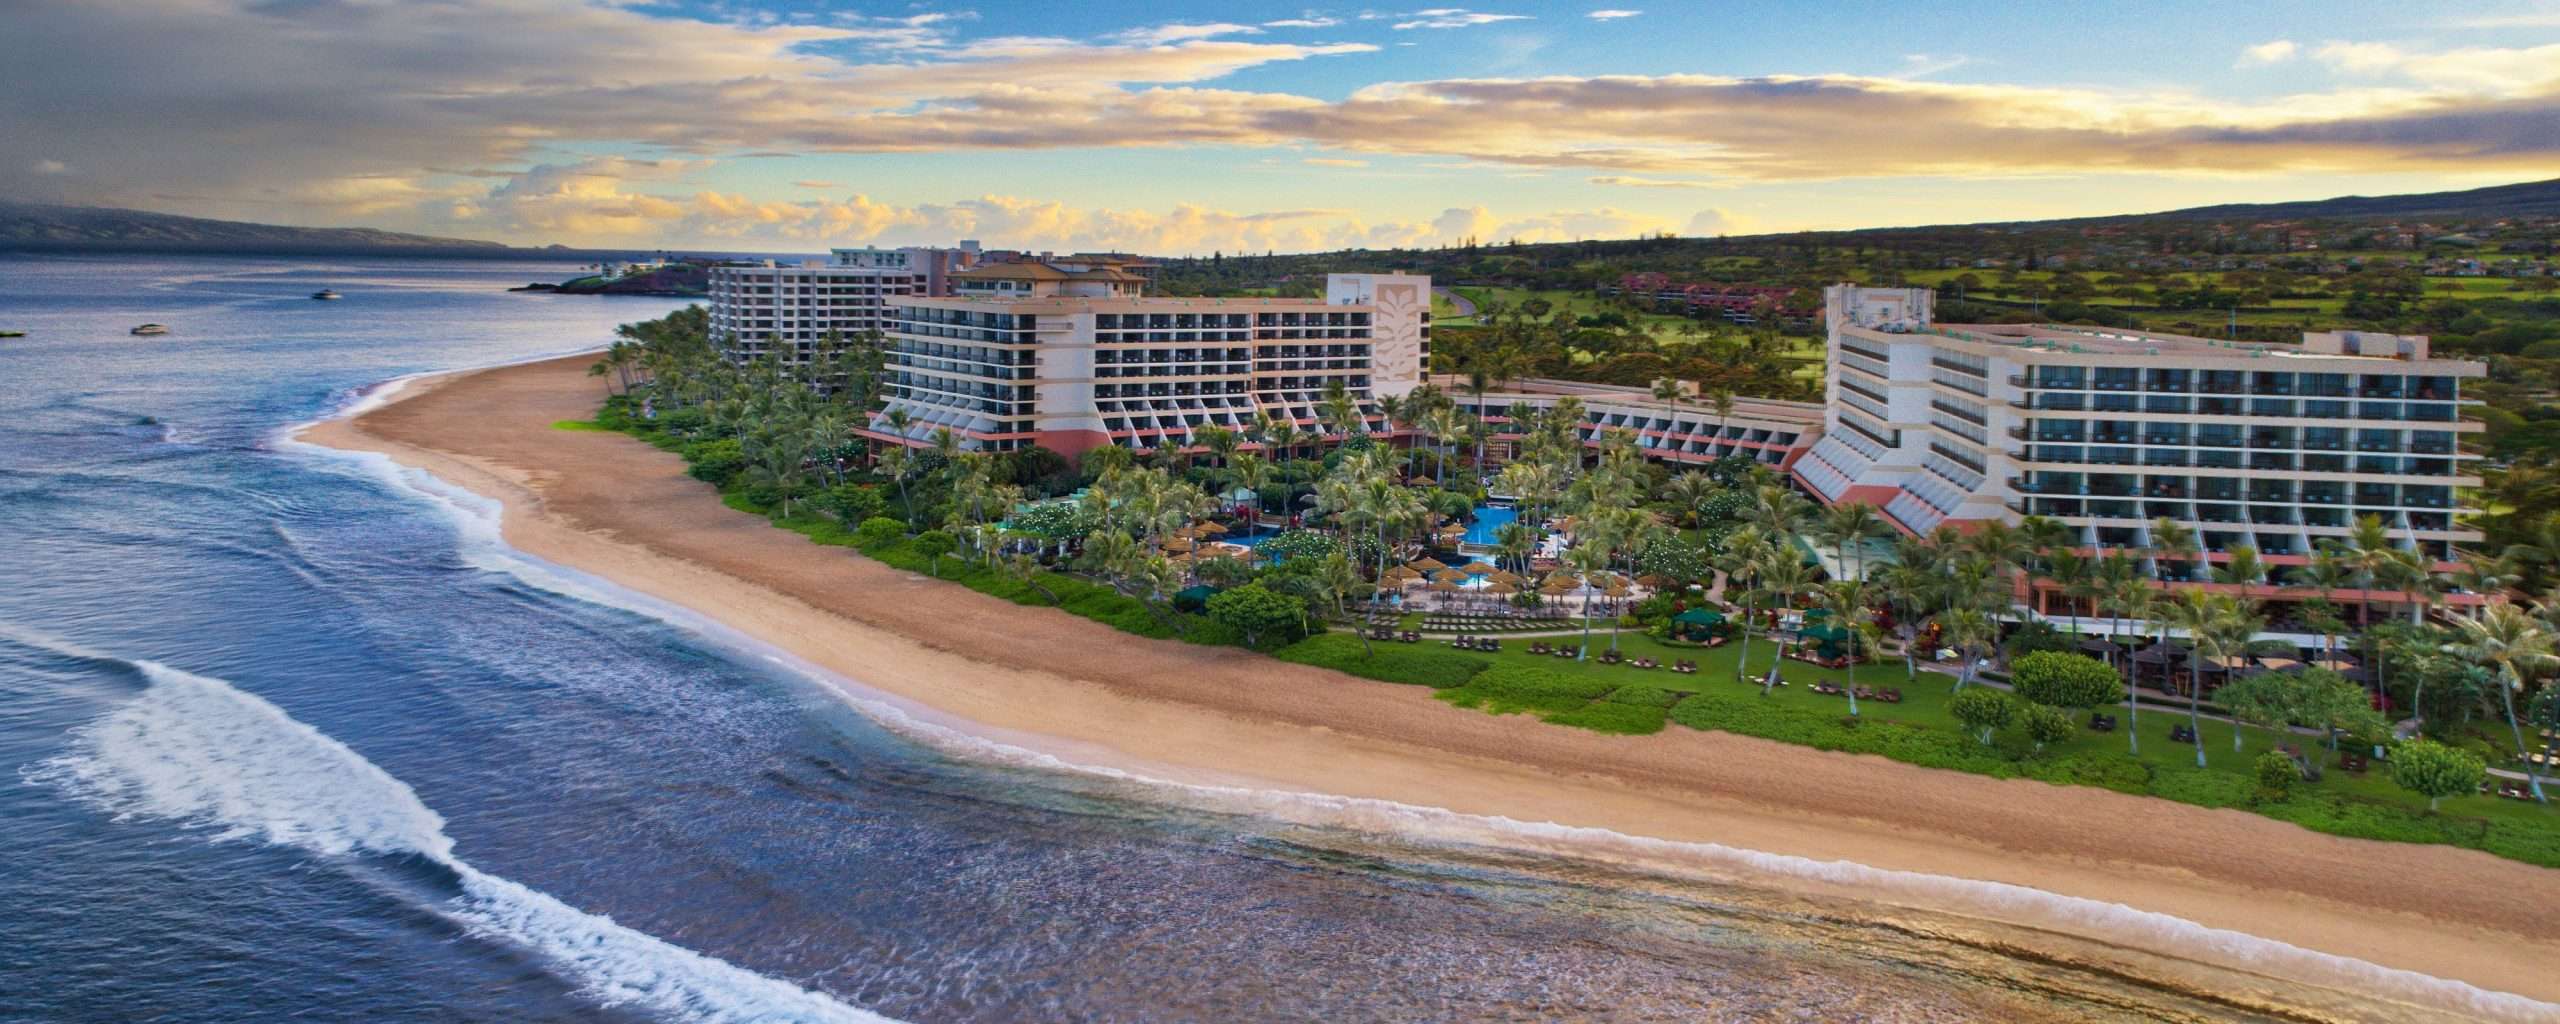 Timeshare Promotions Free Stay Hawaii